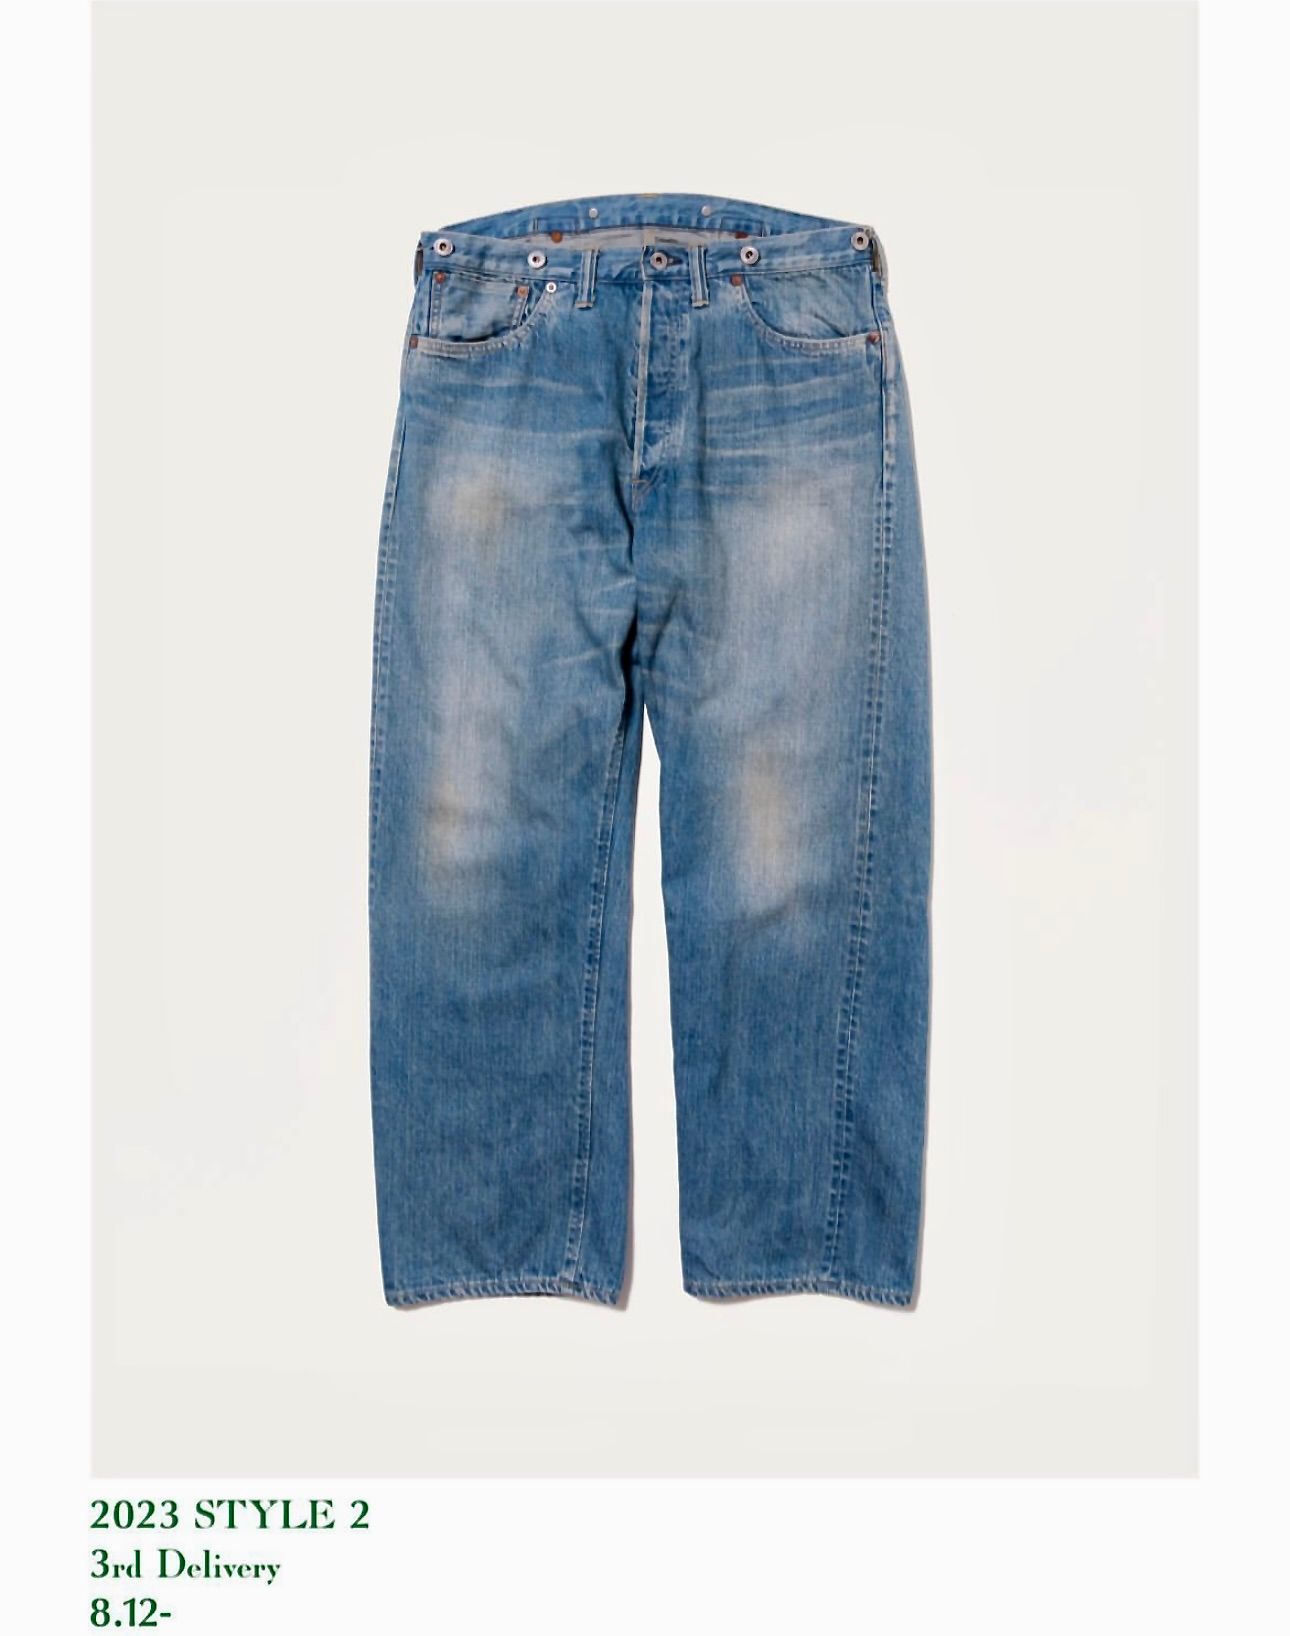 A.PRESSE - アプレッセ No.2 Washed Denim Pants(23AAP-04-10H 